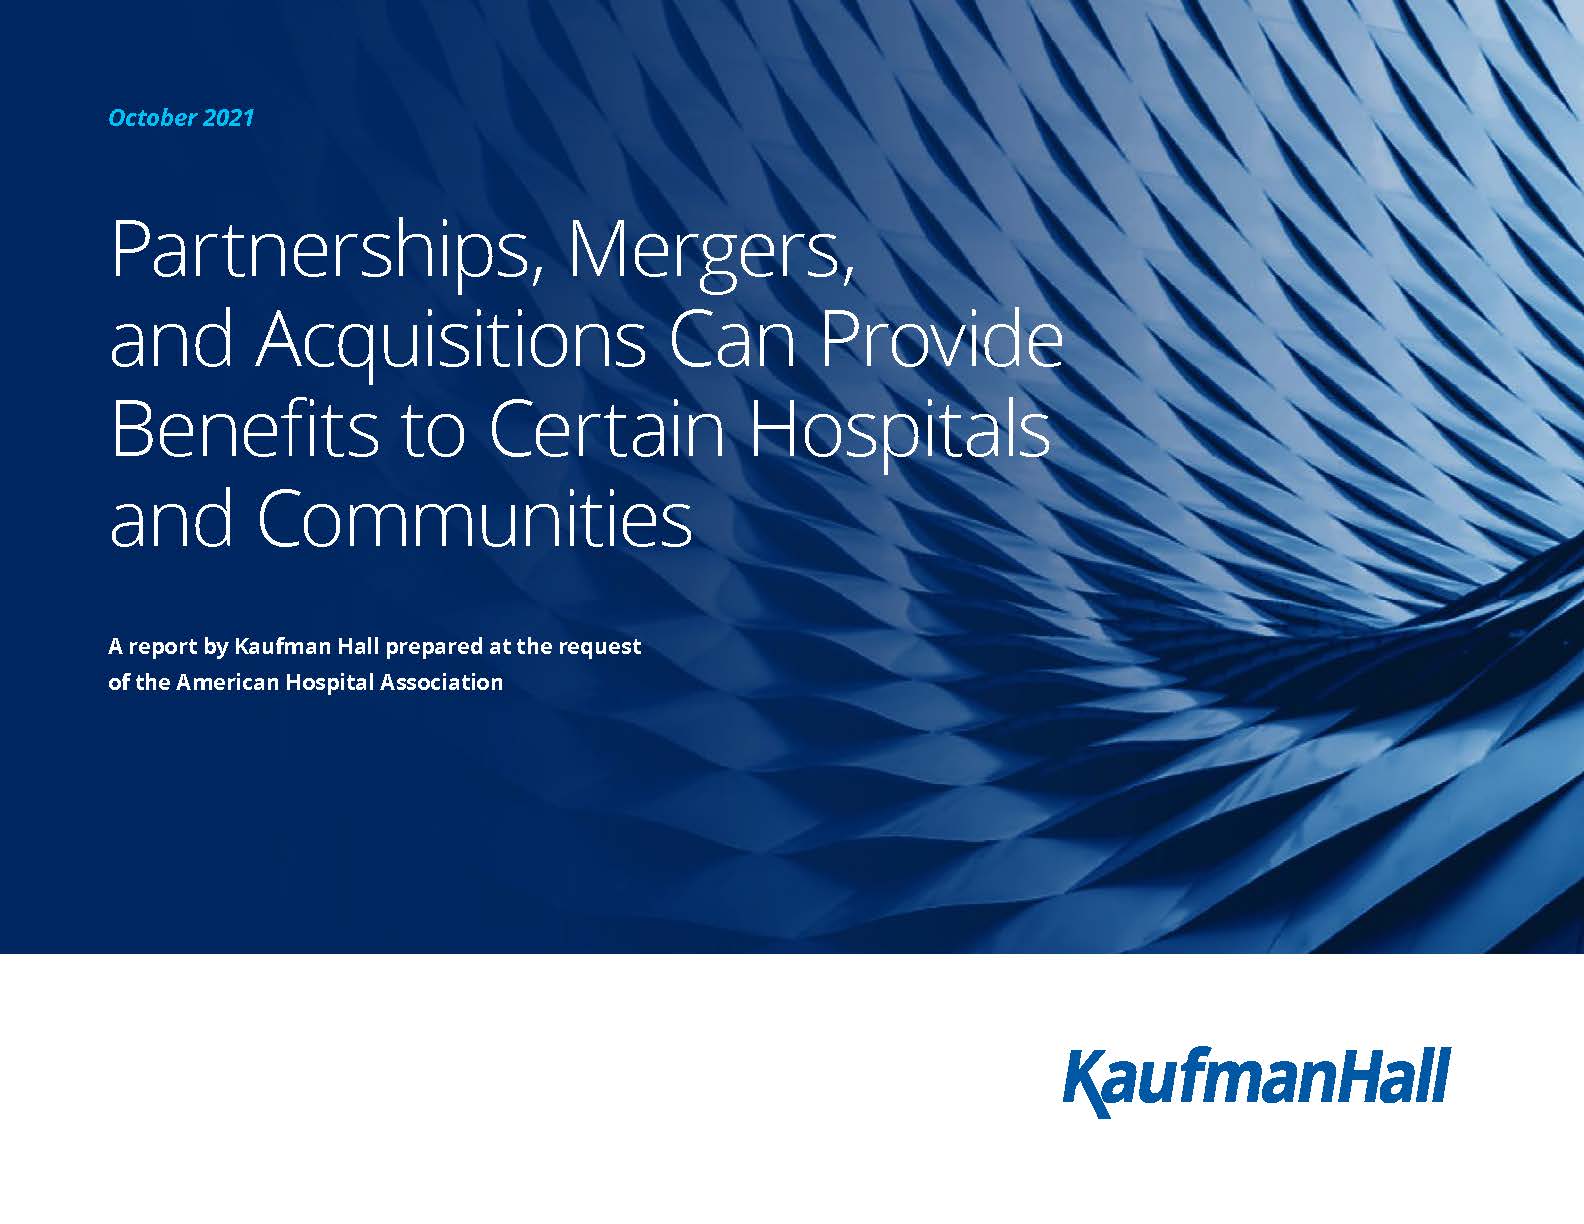 Partnerships, Mergers, and Acquisitions Can Provide Benefits to Certain